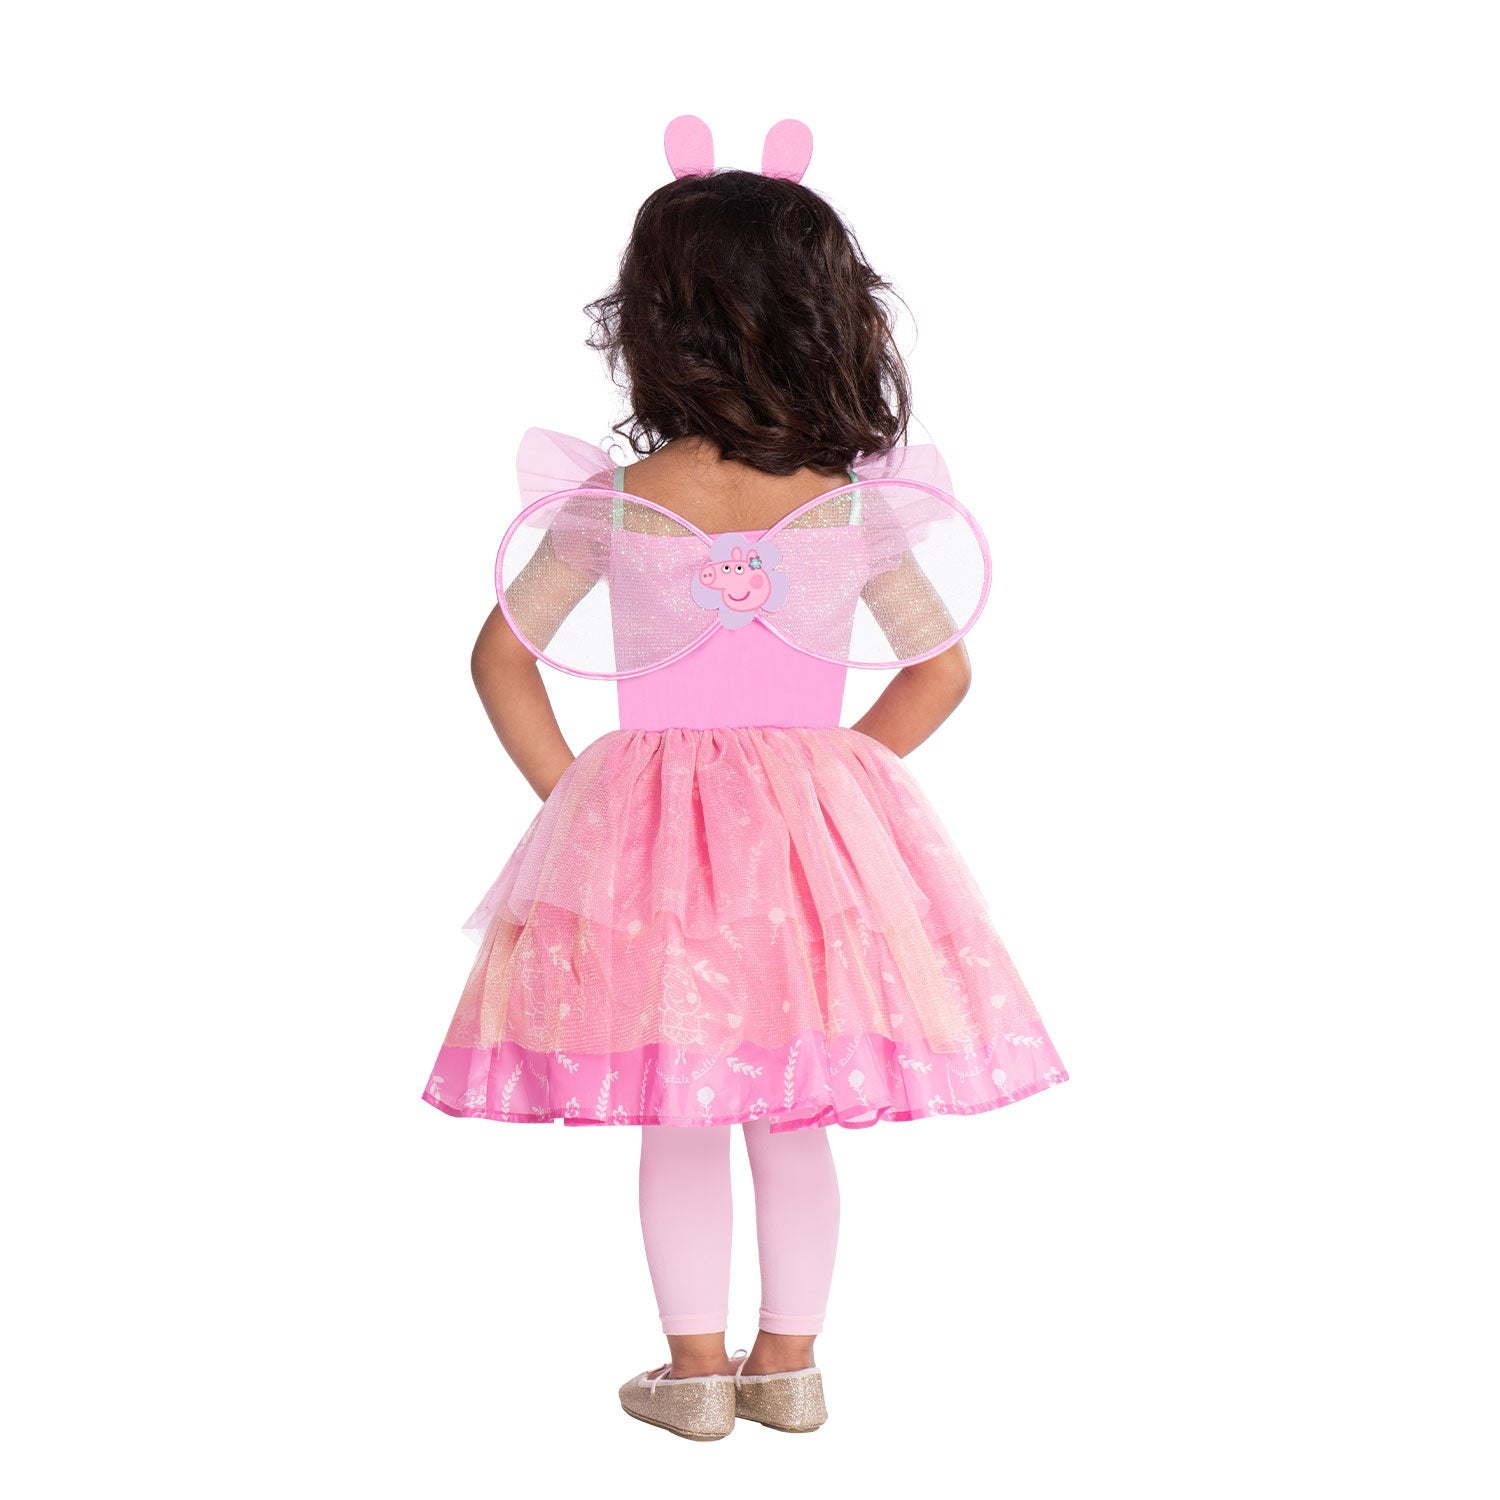 Peppa Pig Fairy Costume includes dress, wings and headband